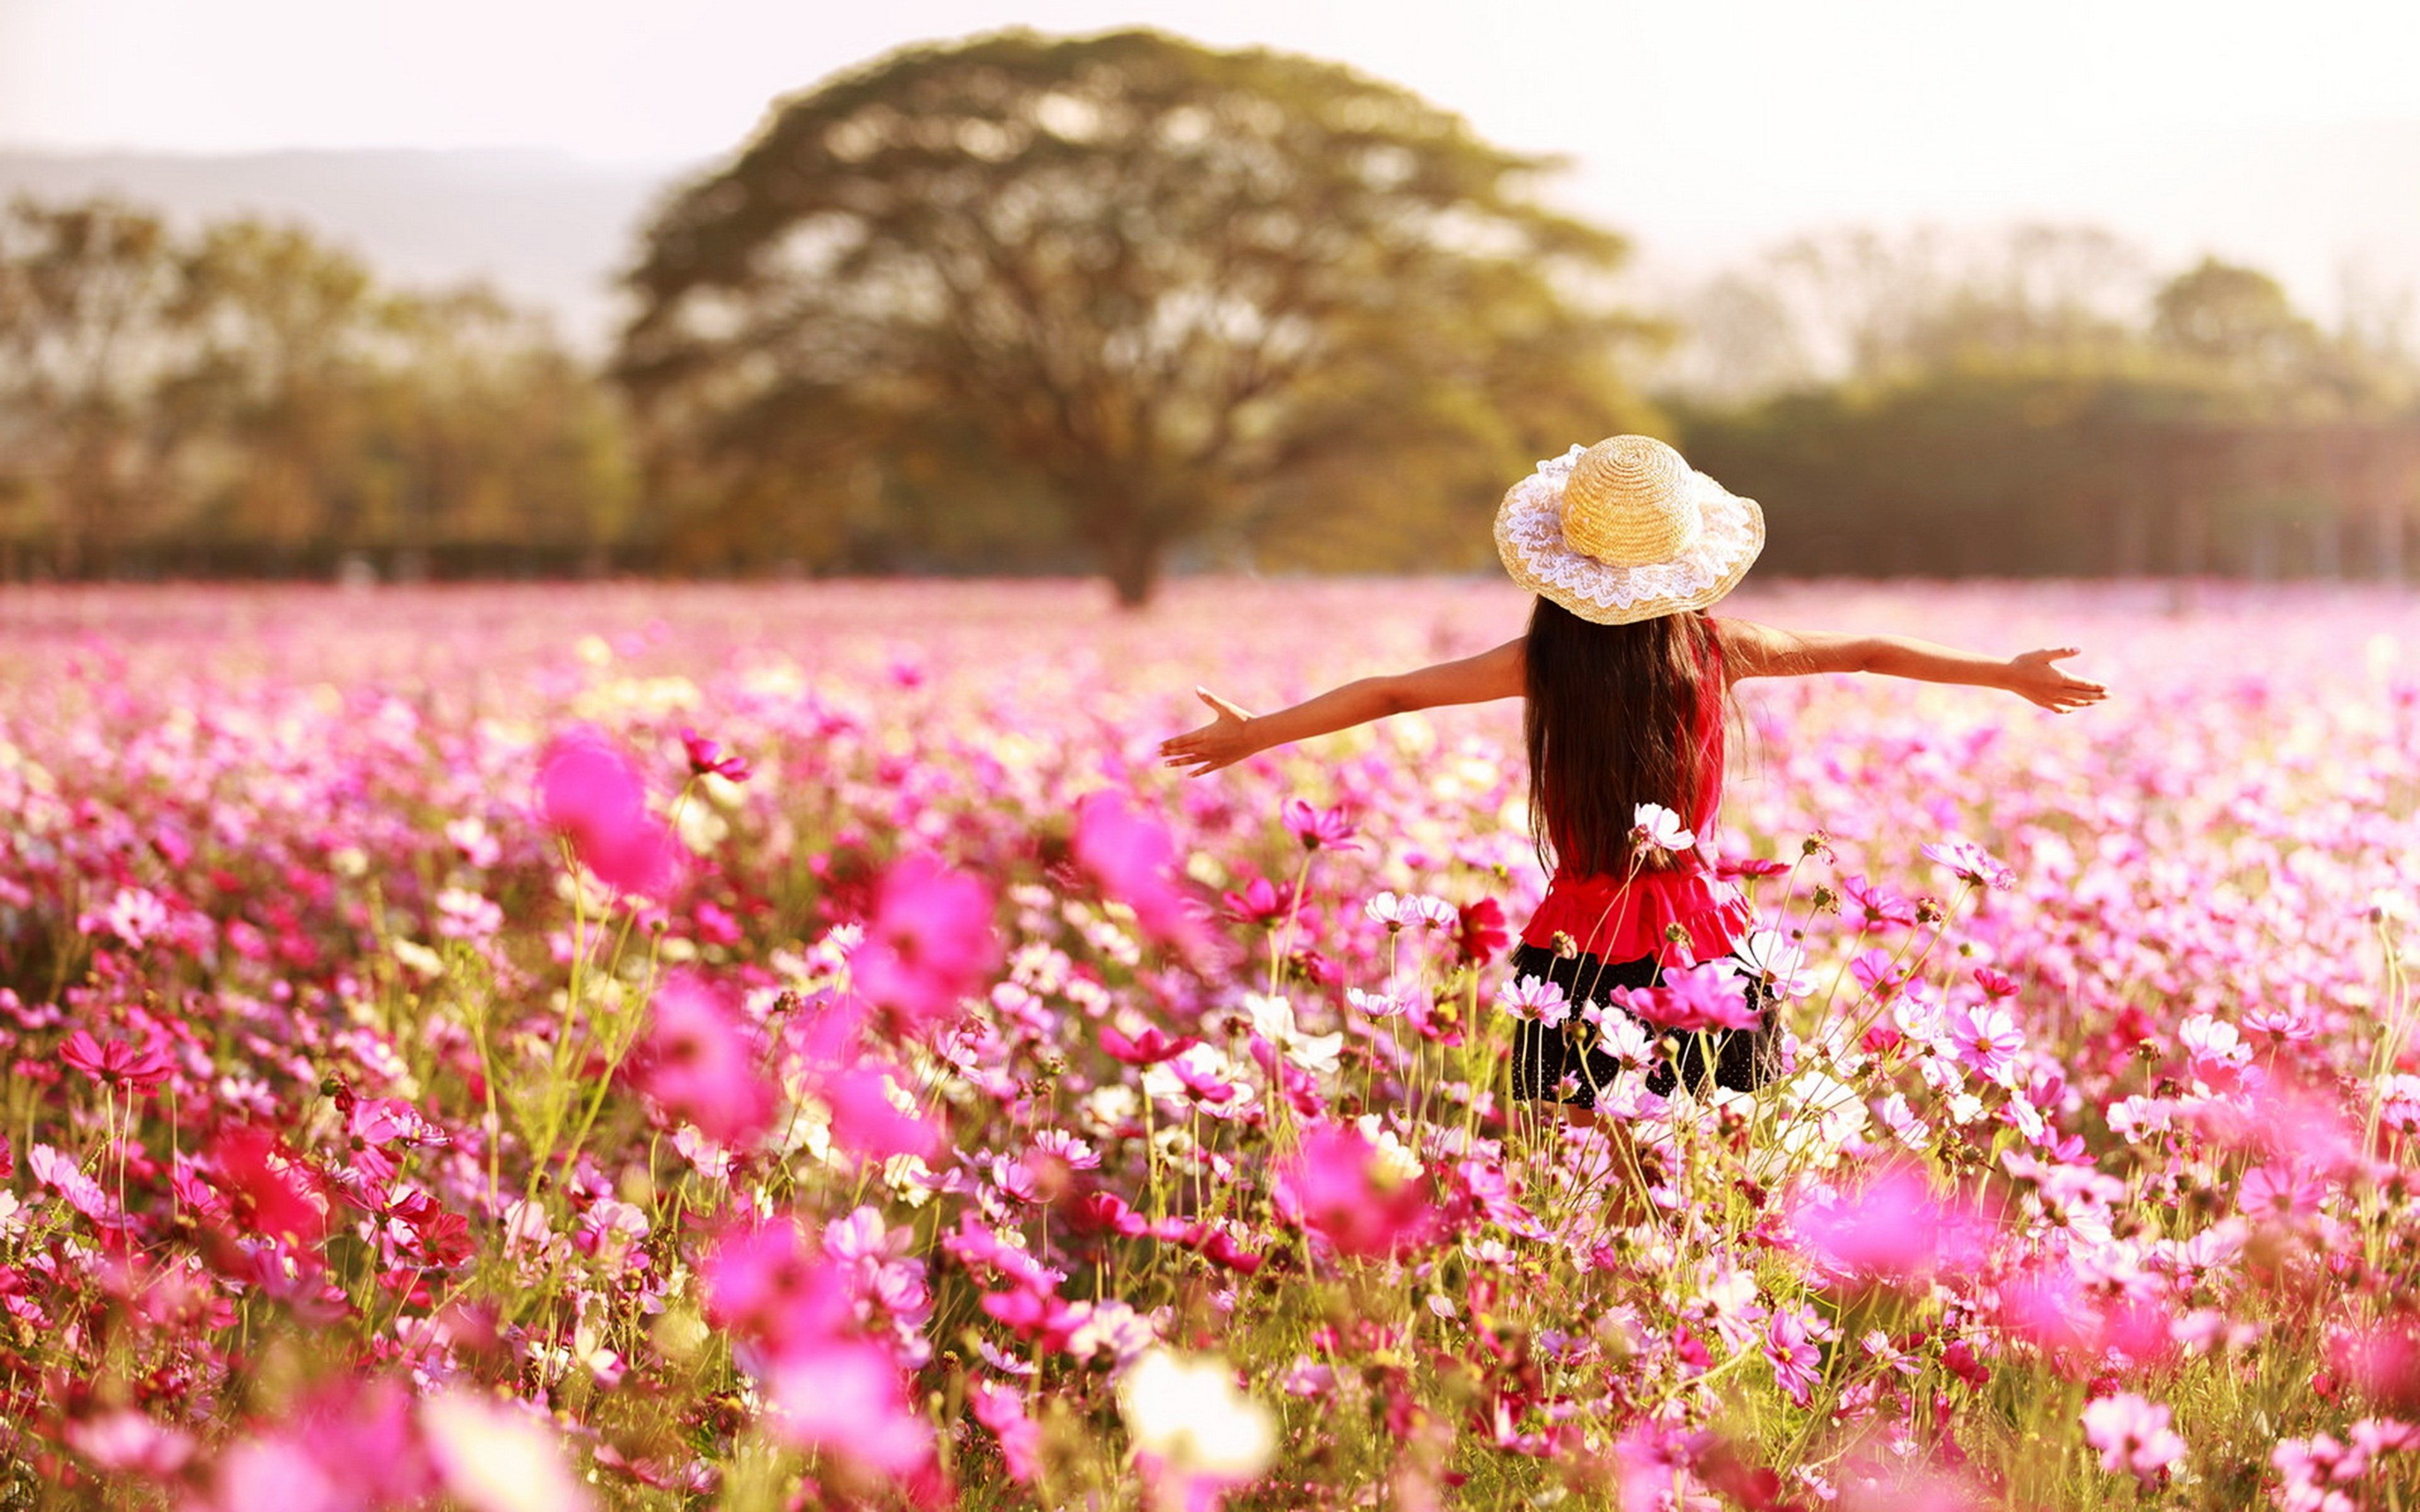 Wallpaper, 3840x2400 px, childhood, children, countryside, Earth, flowers, fun, girls, happy, Joy, kids, landscapes, life, nature, pink, rose, spring, trees 3840x2400